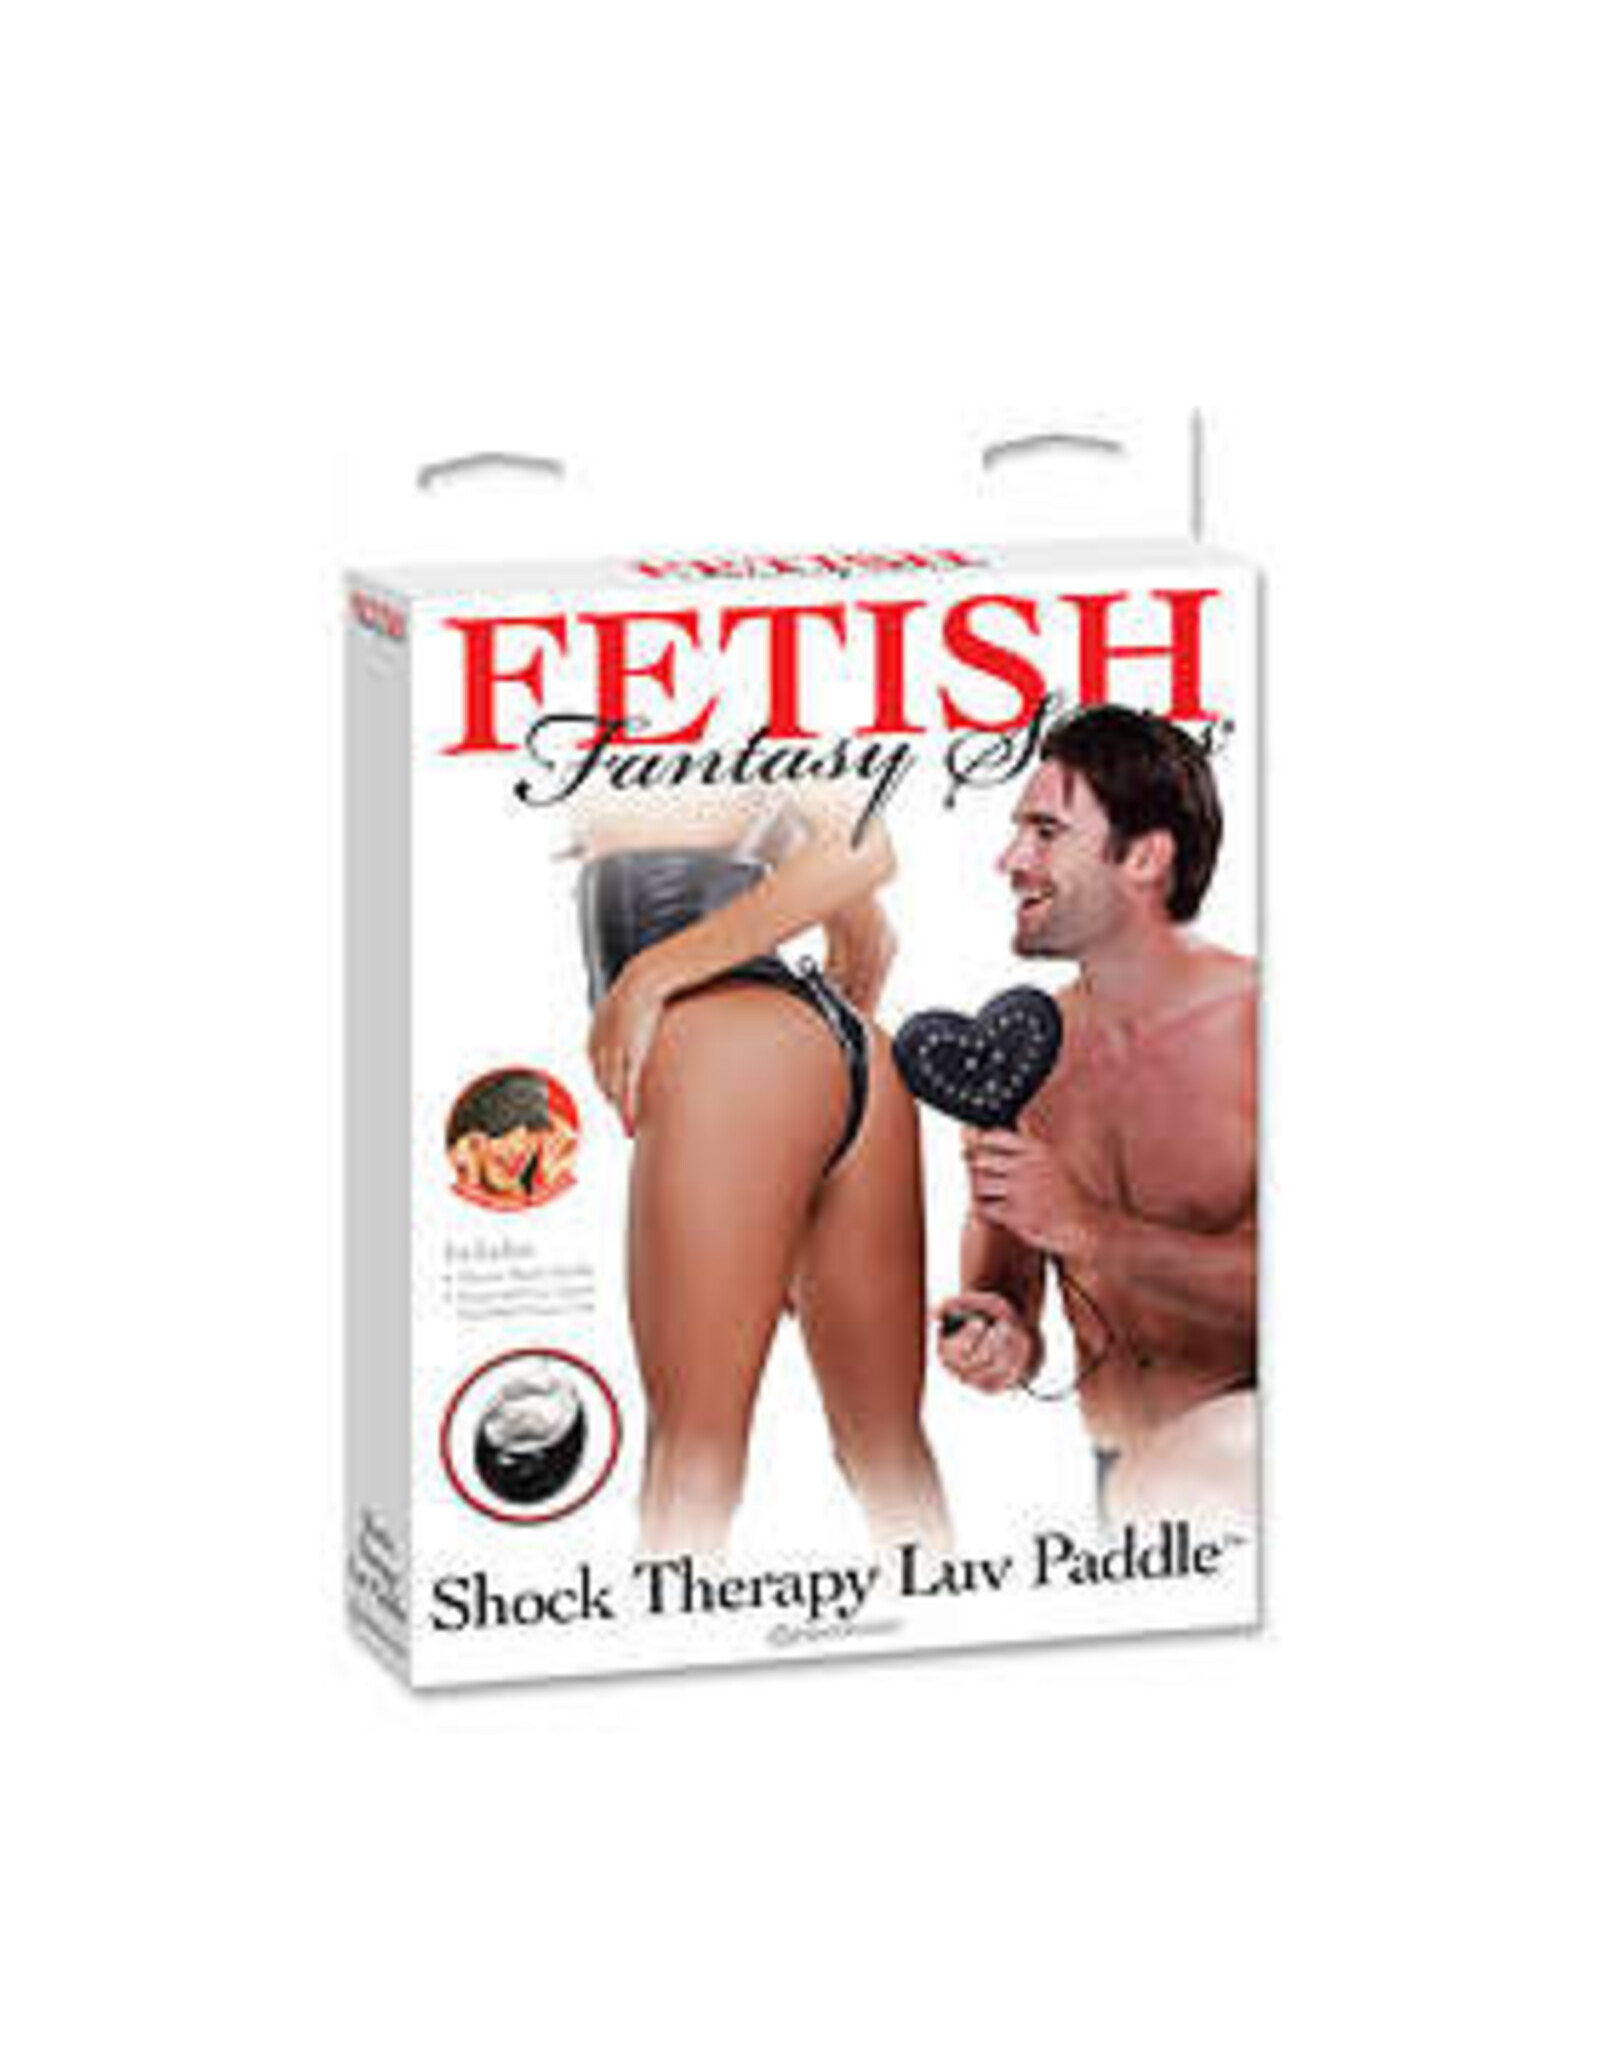 Pipedream Shock Therapy Luv Paddle